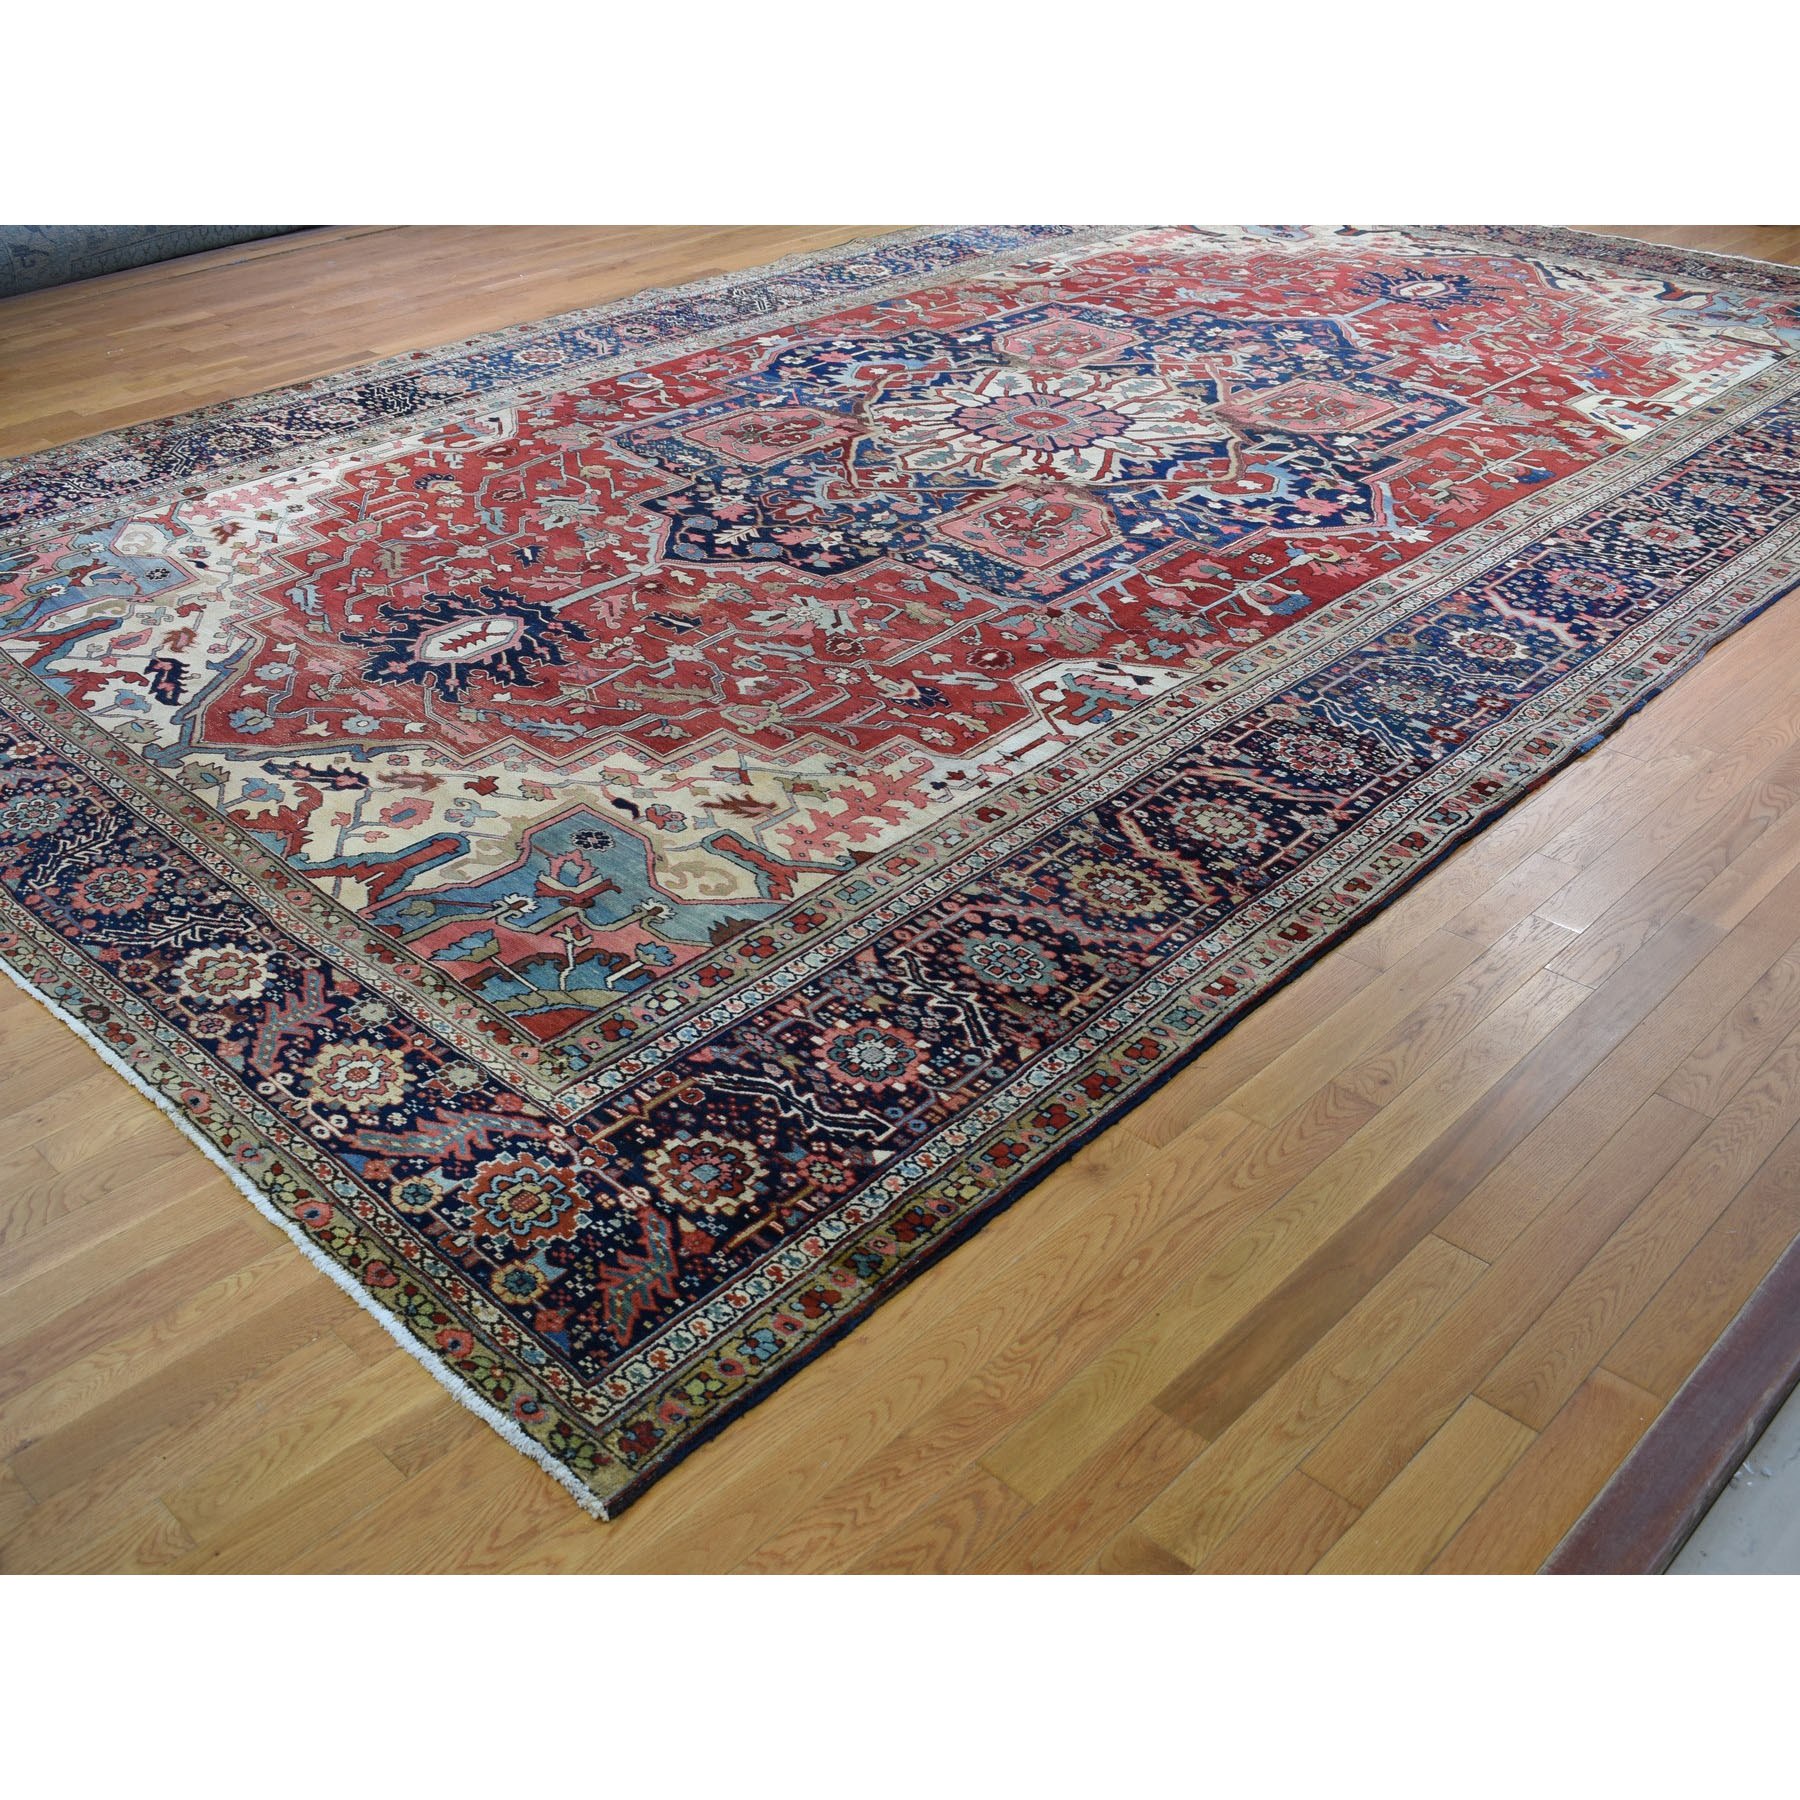 12-1 x19-5  Large Size Original Antique Persian Serapi Heriz Some Wear Clean Hand Knotted Oriental Rug 